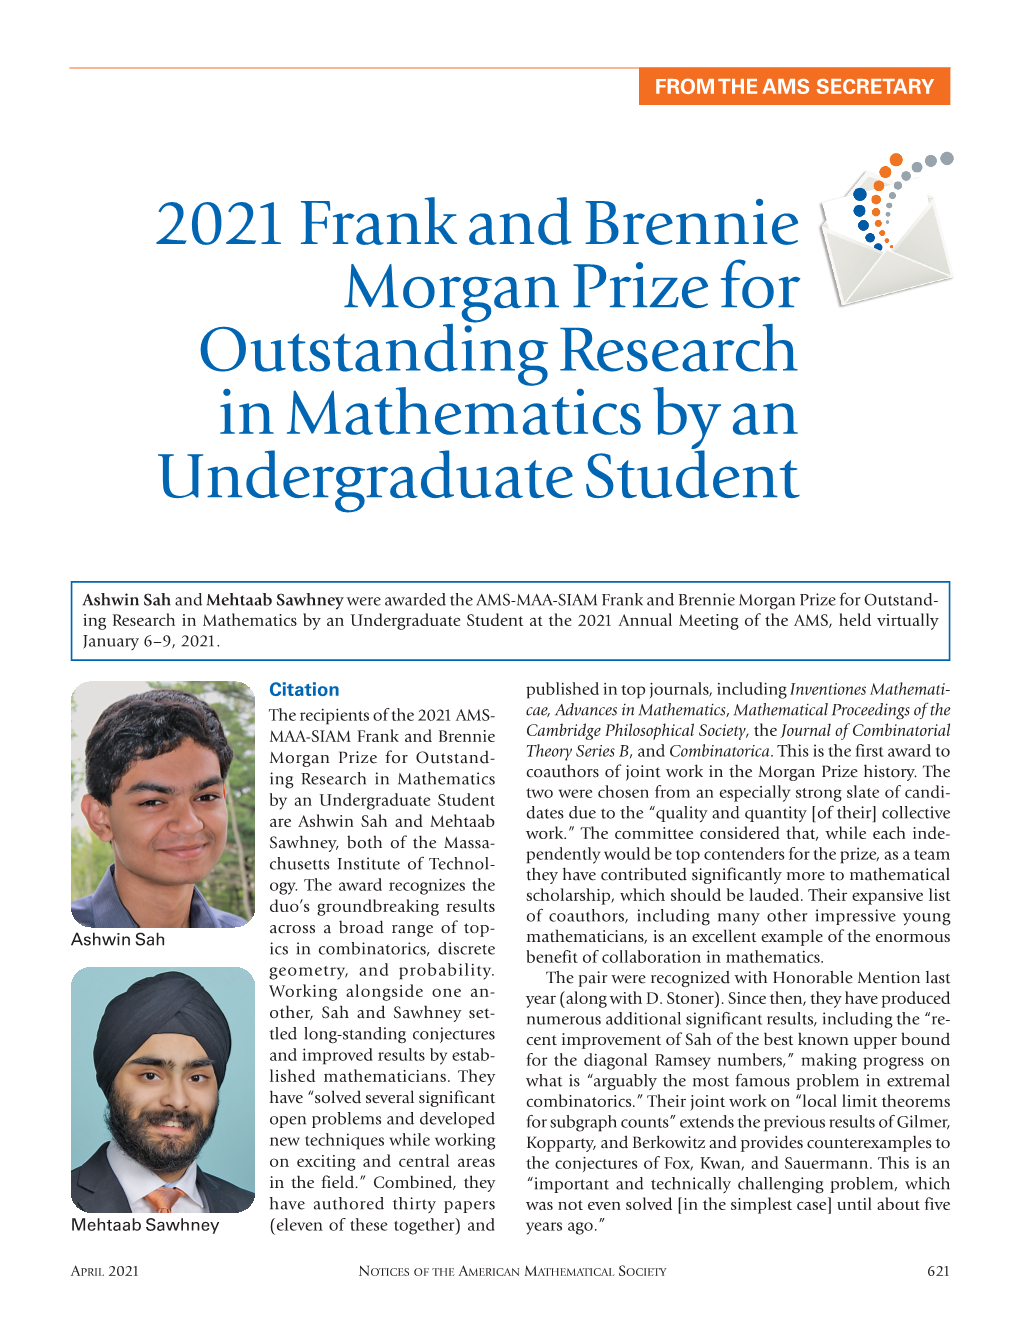 2021 Frank and Brennie Morgan Prize for Outstanding Research in Mathematics by an Undergraduate Student